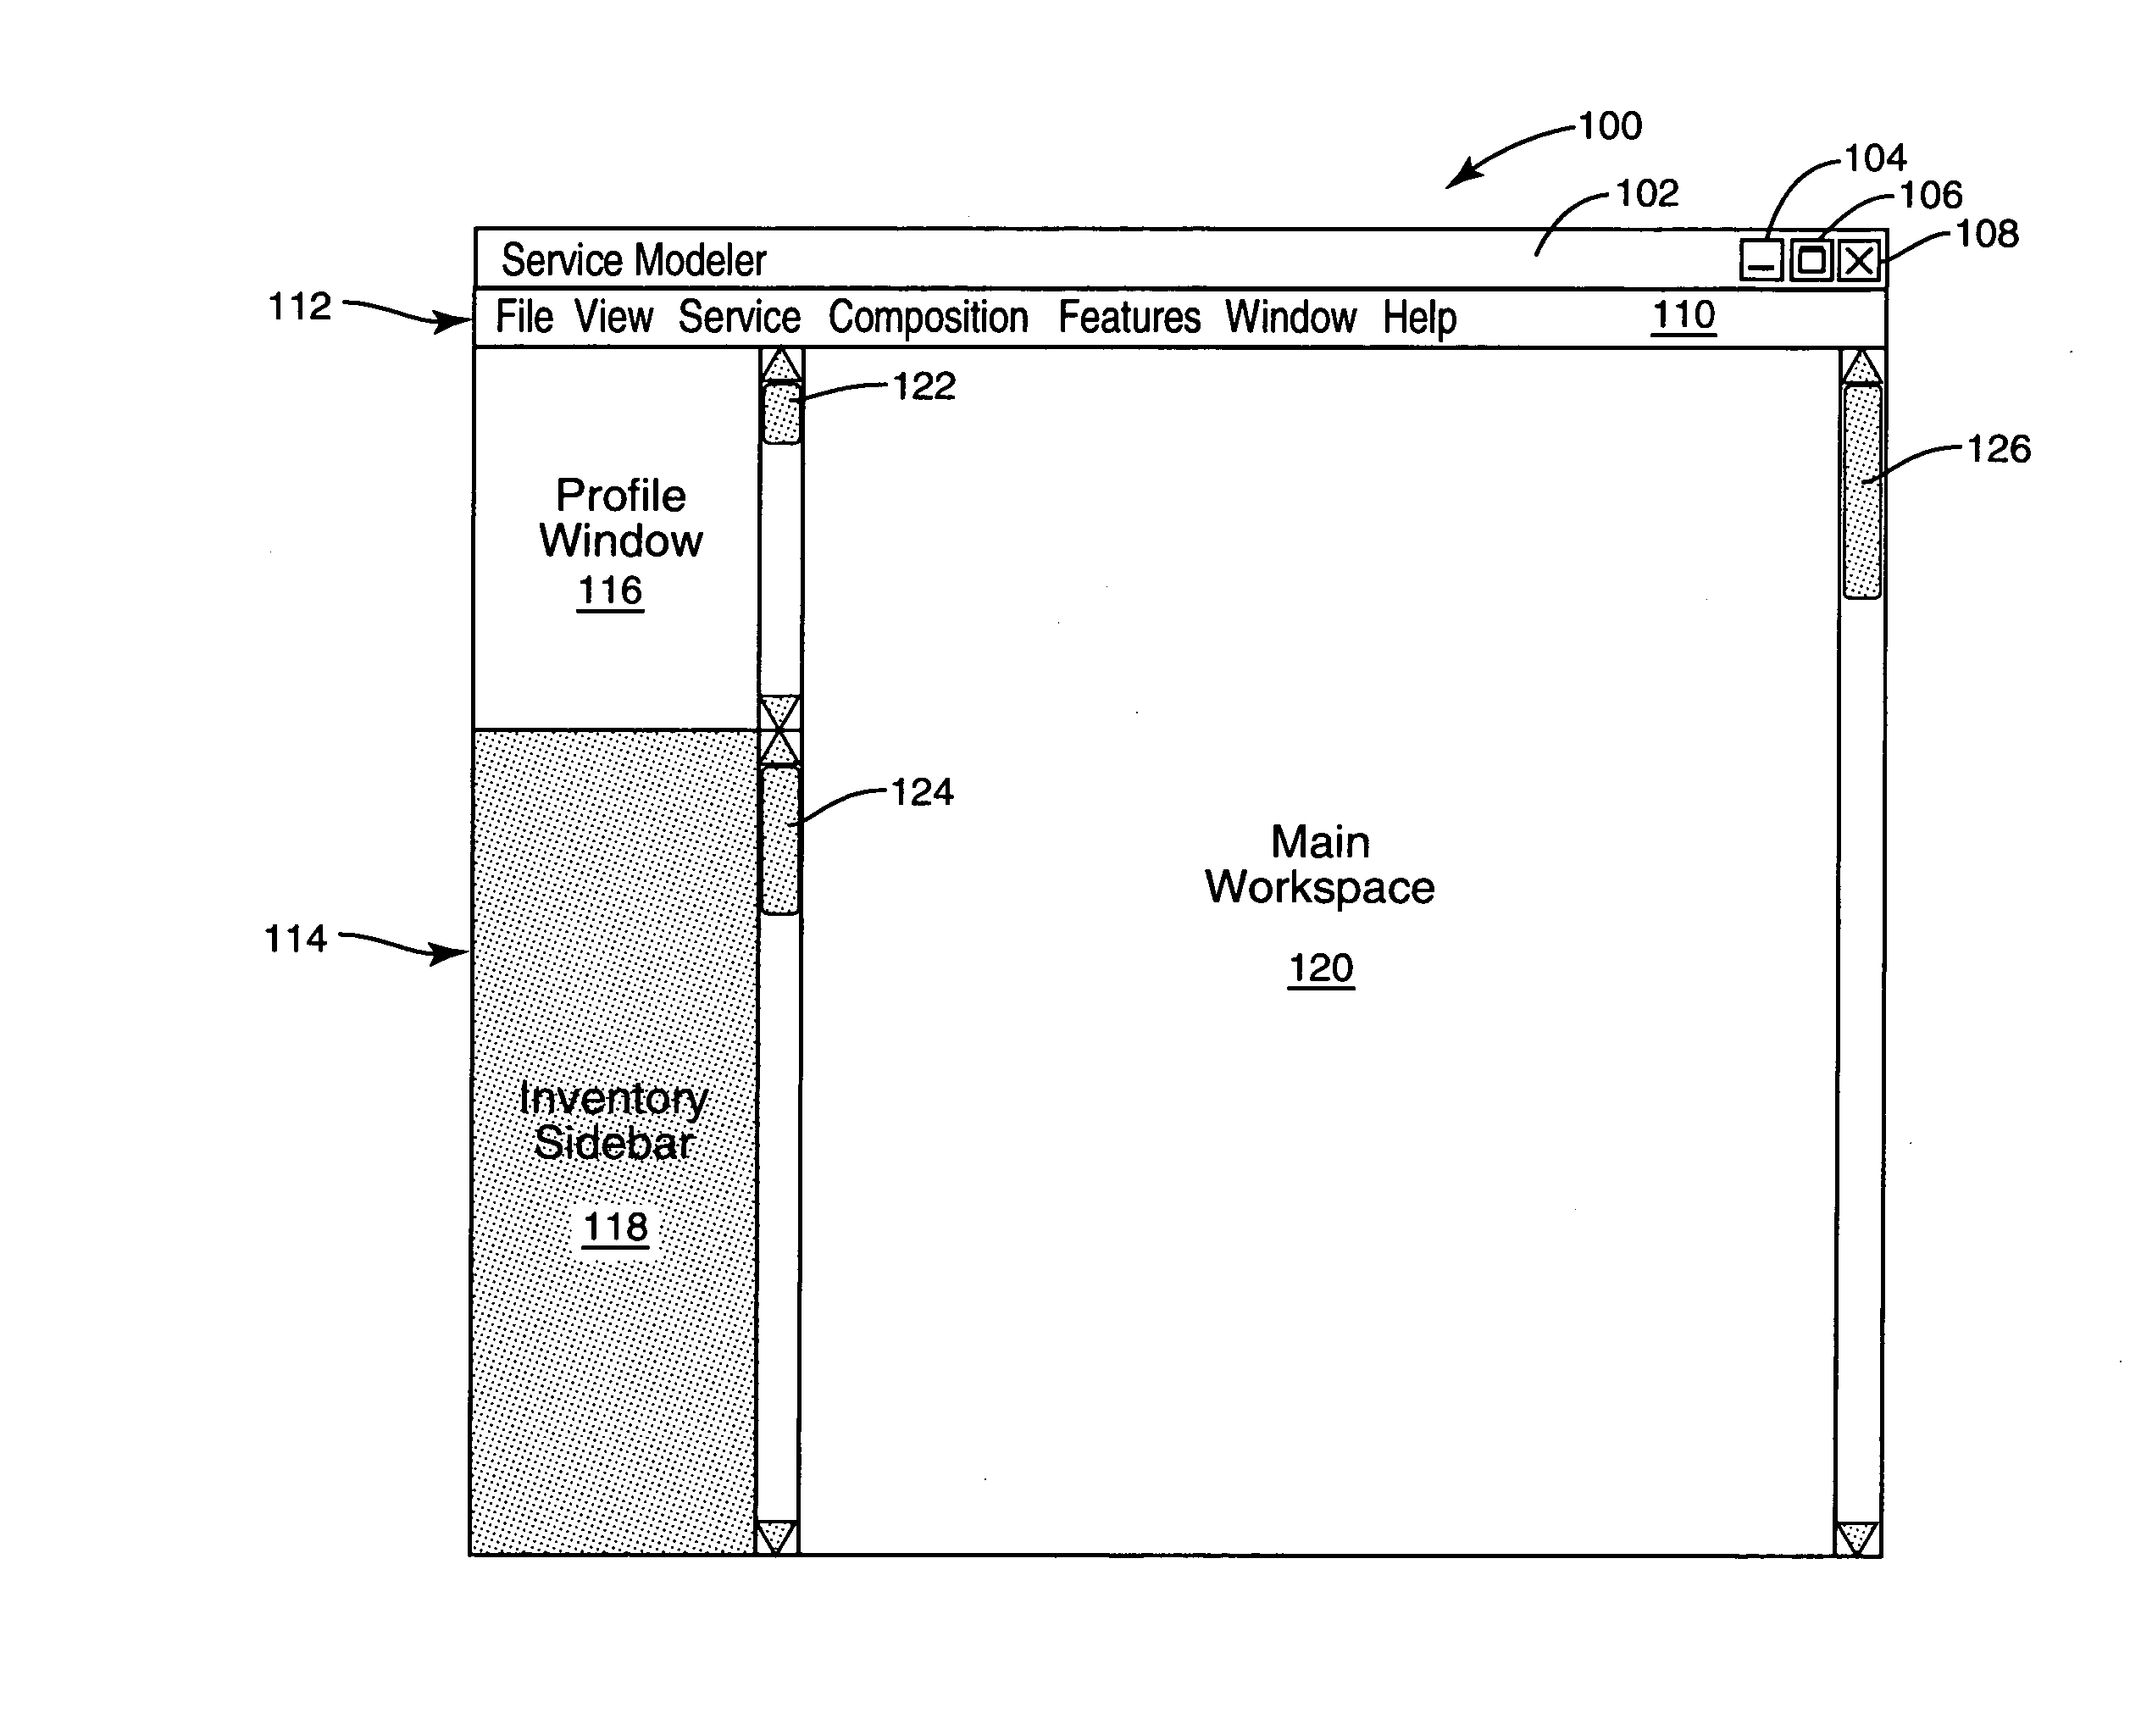 Display and management of a service composition candidate inventory